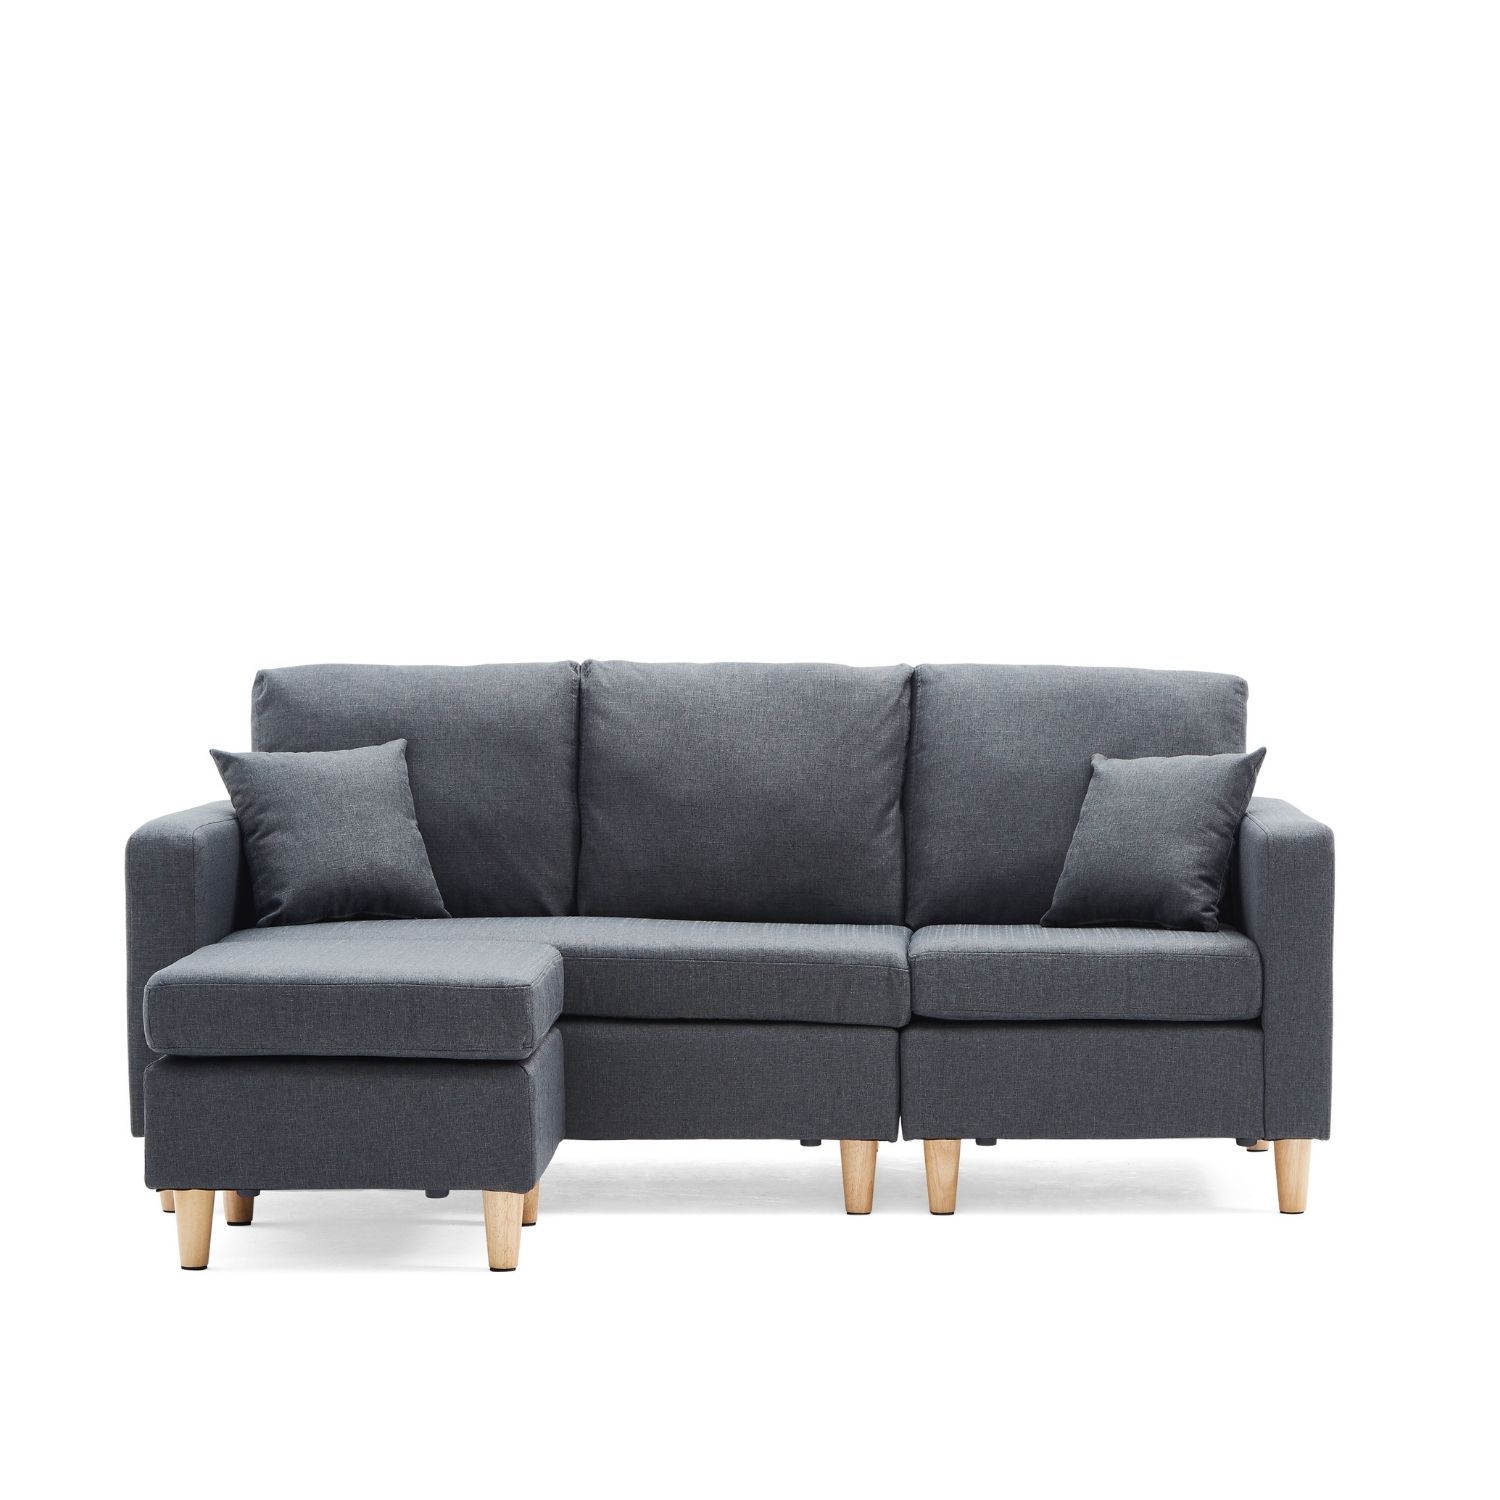 Valolam Compact Sectional Sofa Valyou Furniture 